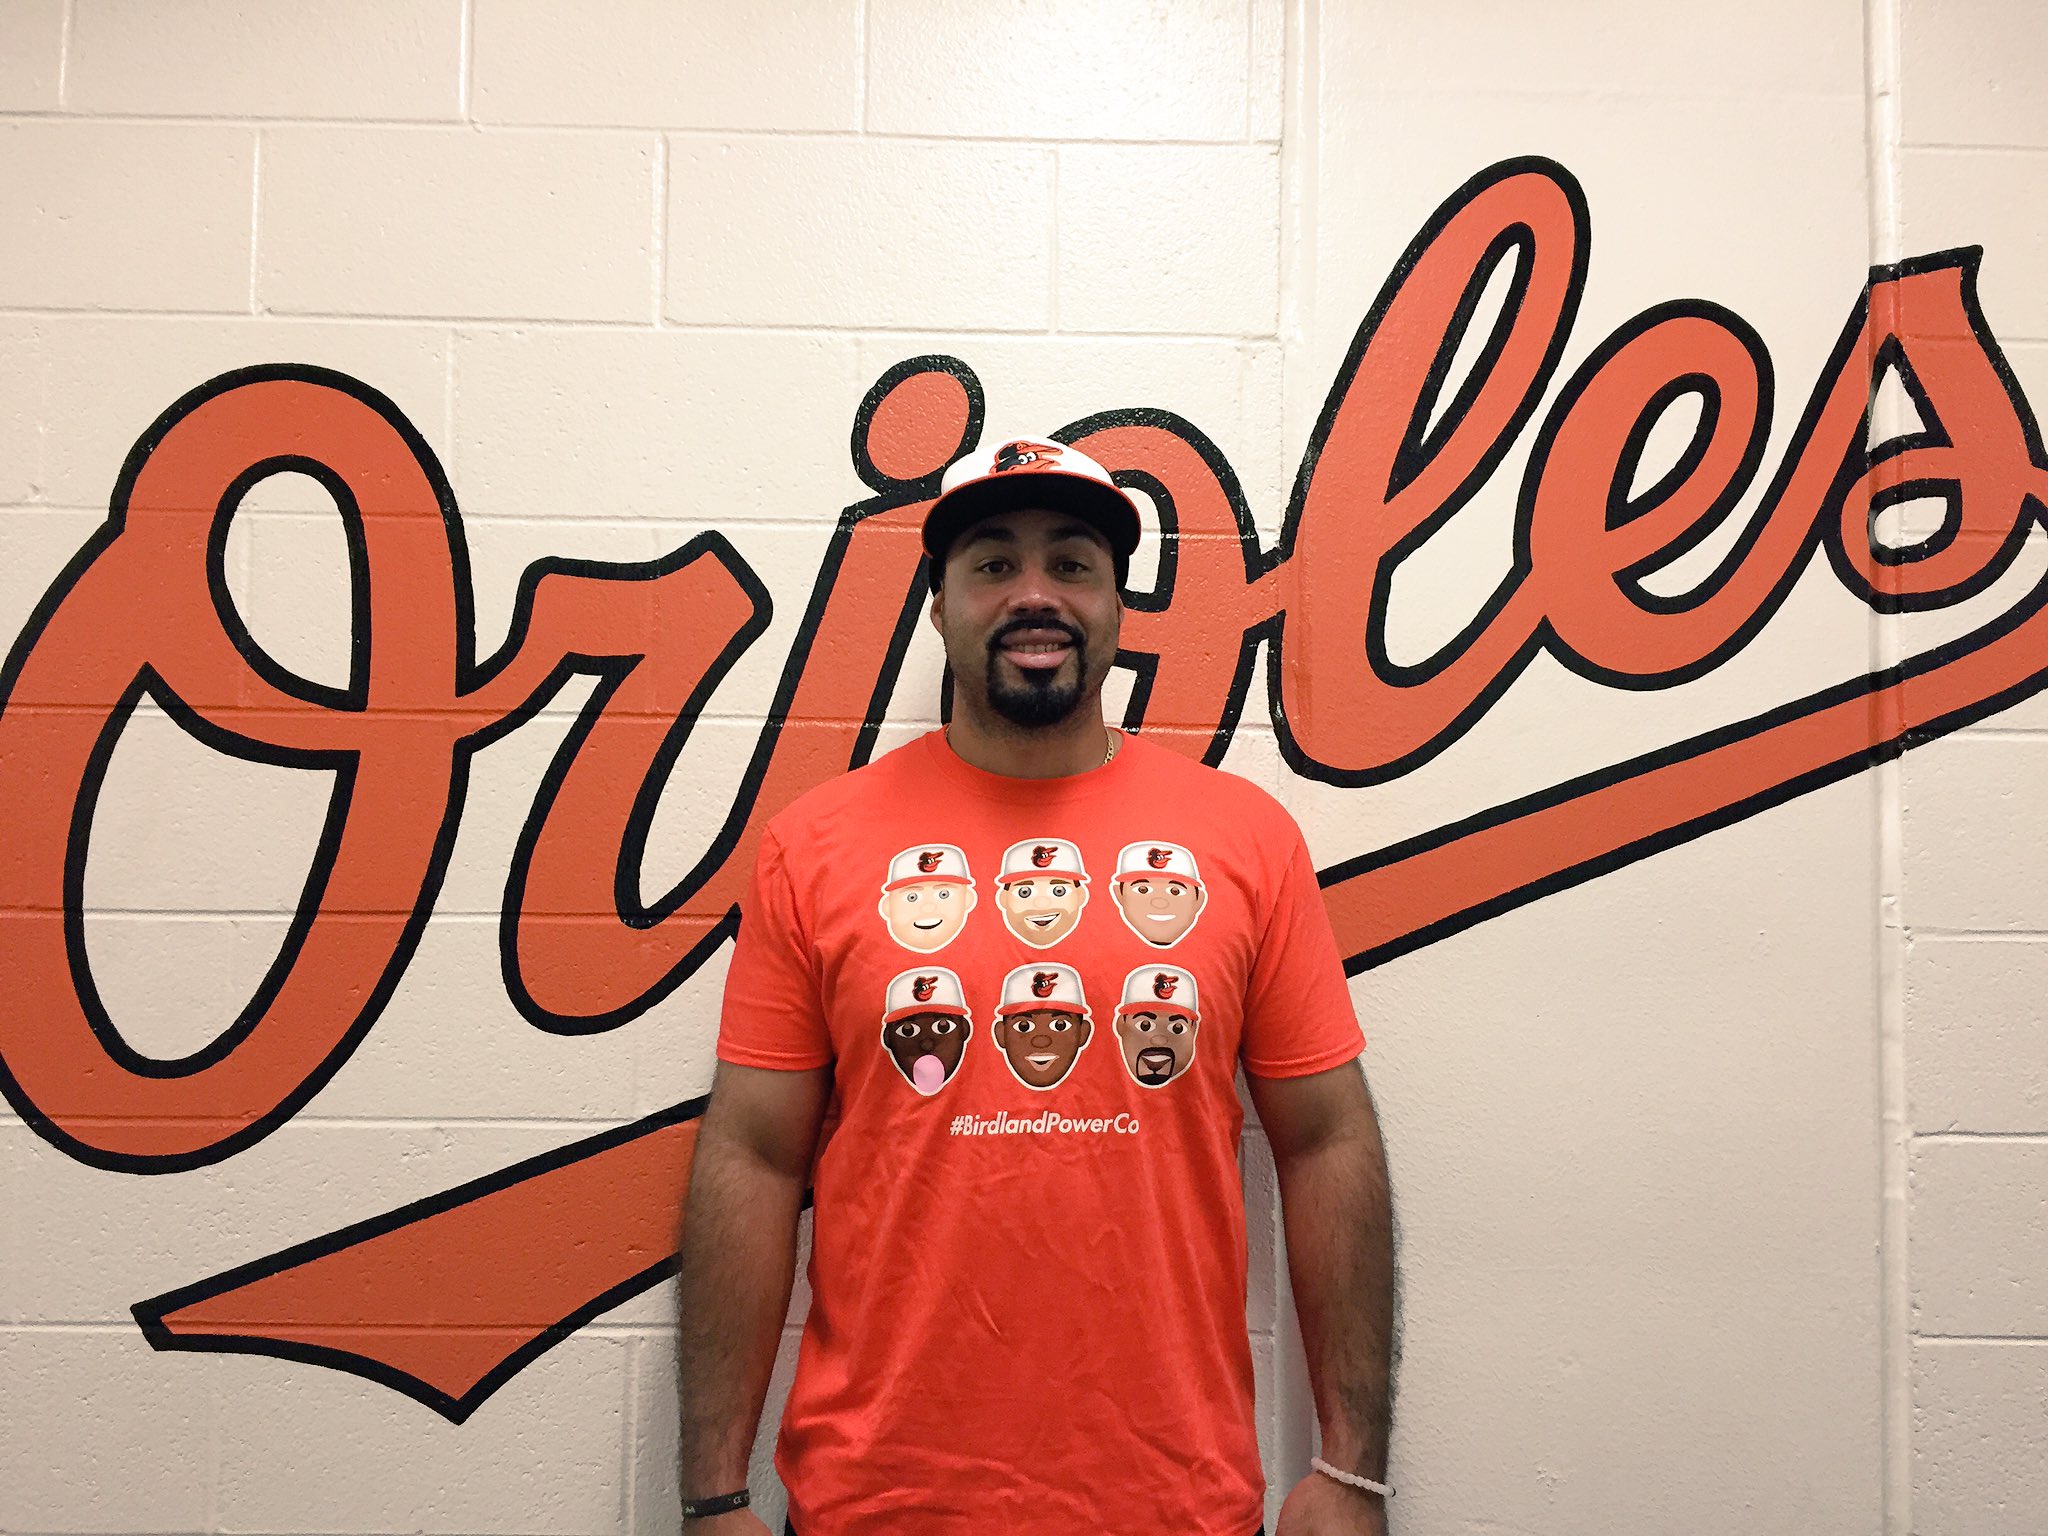 Baltimore Orioles on X: My face is very emoji-able - Pedro All fans at  today's game receive a #BirdlandPowerCo Omoji T-Shirt.   / X